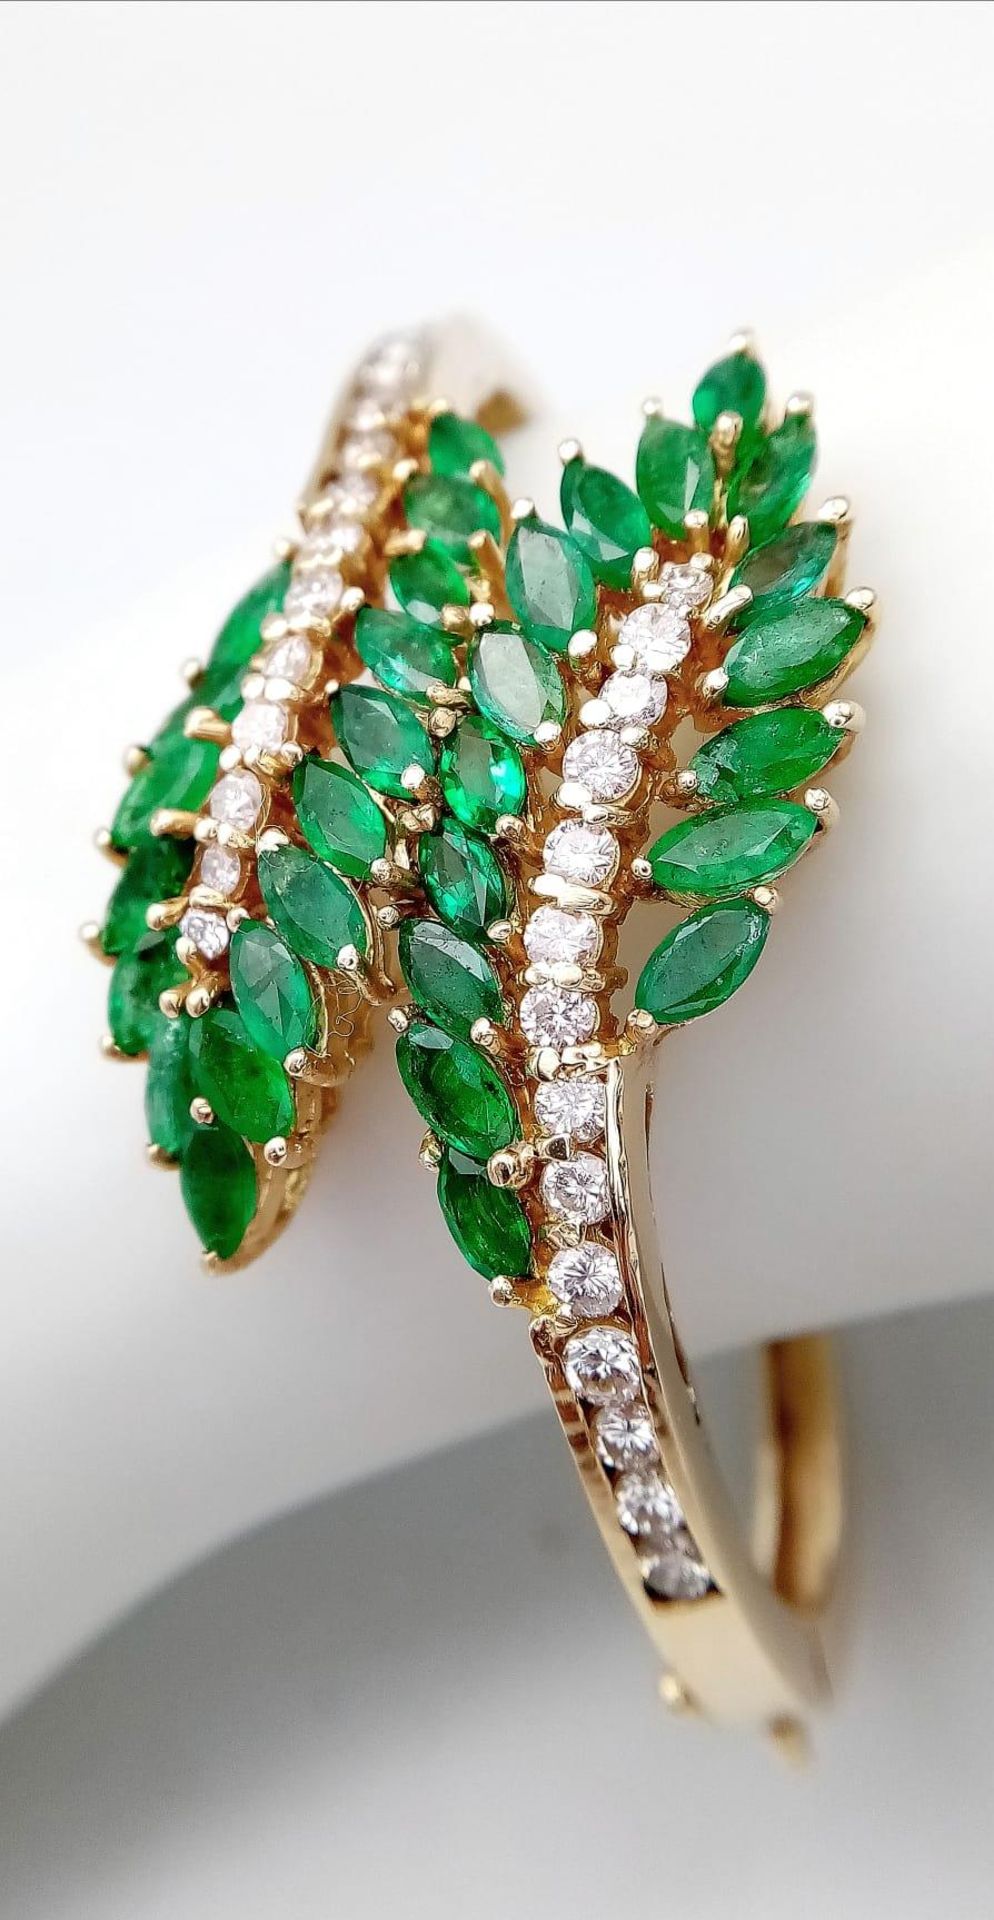 A DIAMOND AND EMERALD LEAF DESIGN BANGLE IN CROSSOVER STYLE SET IN18K GOLD . 33.5gms 10457 - Image 11 of 15